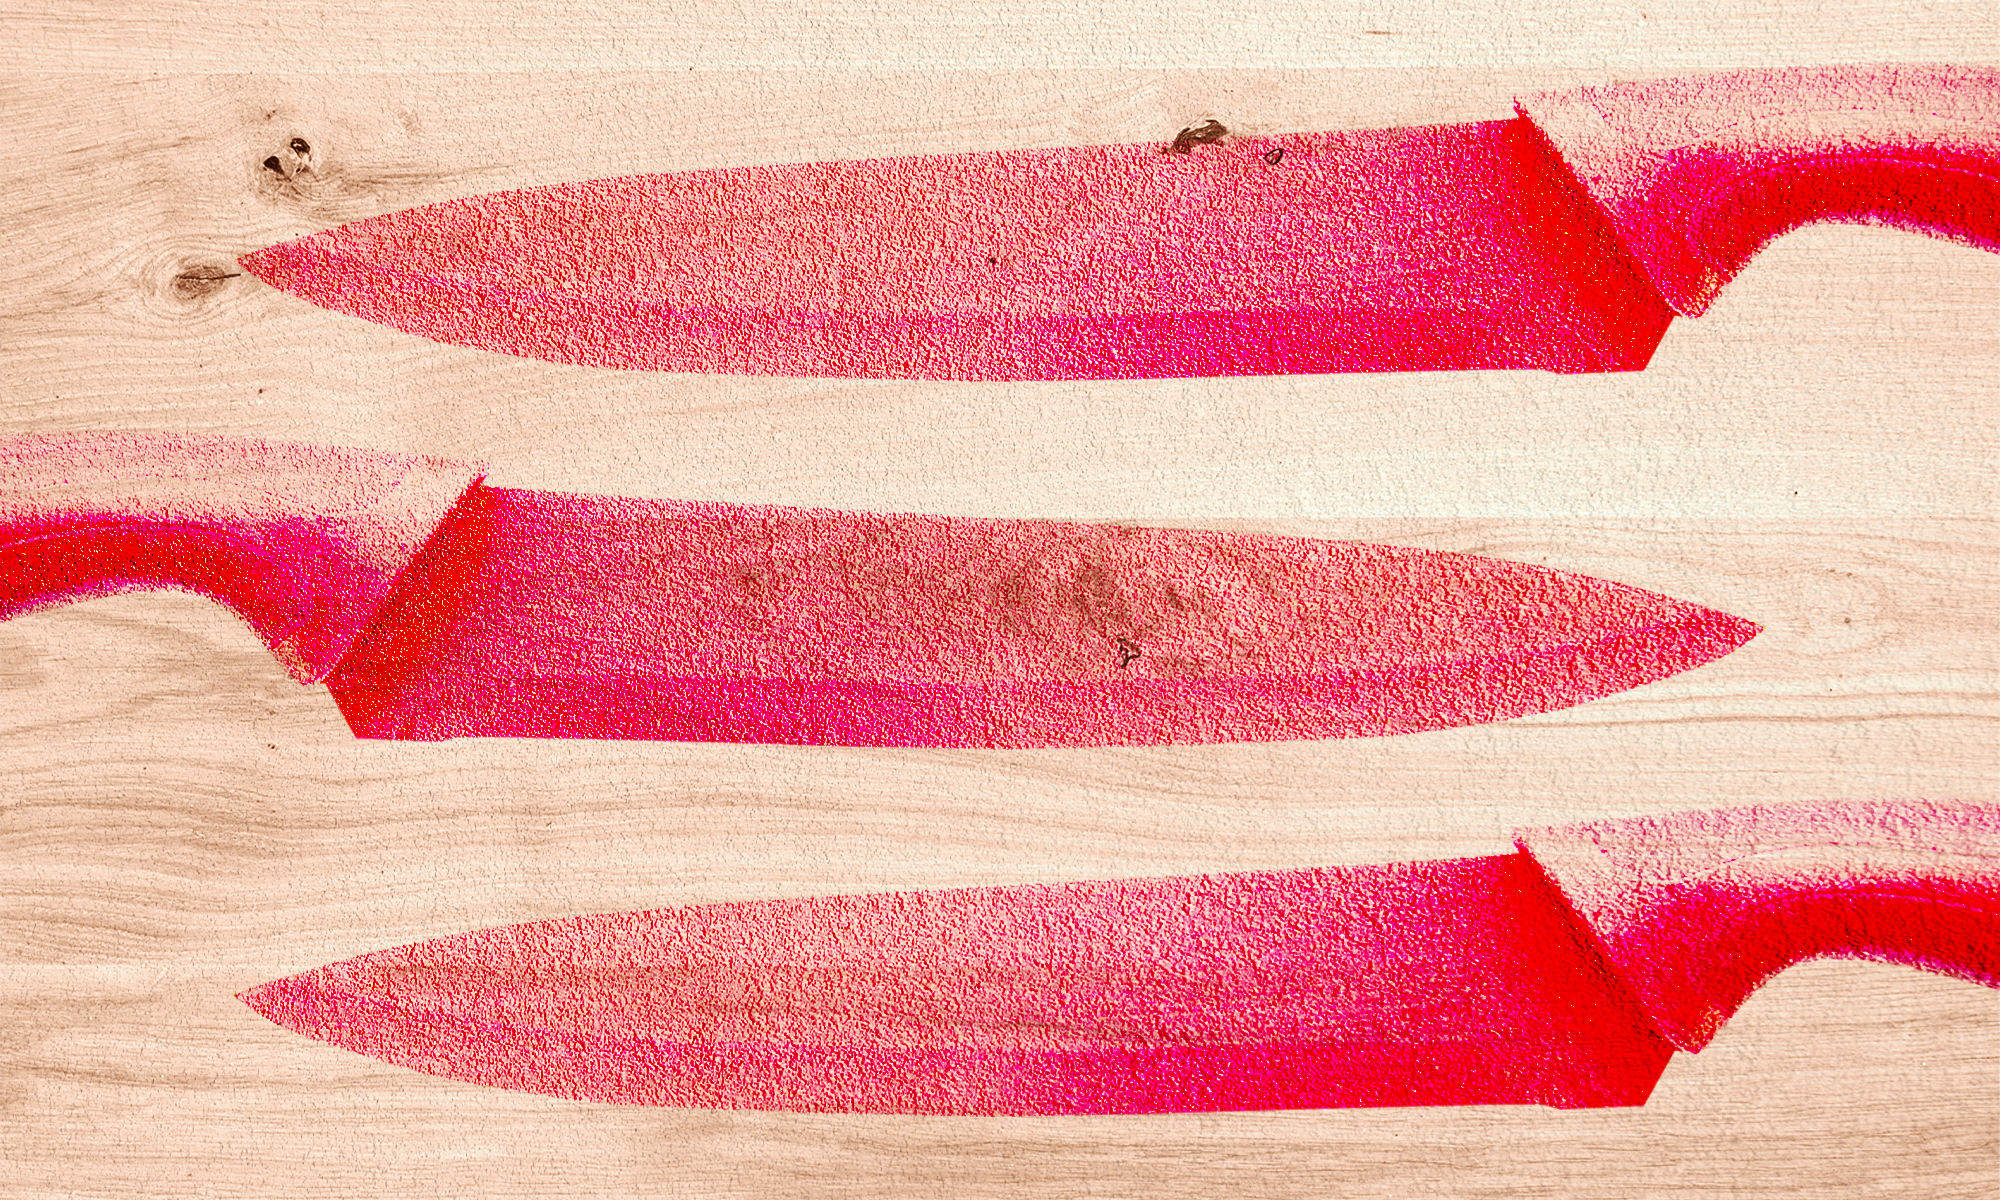 Illustration of three red knives atop a wood-rain background.